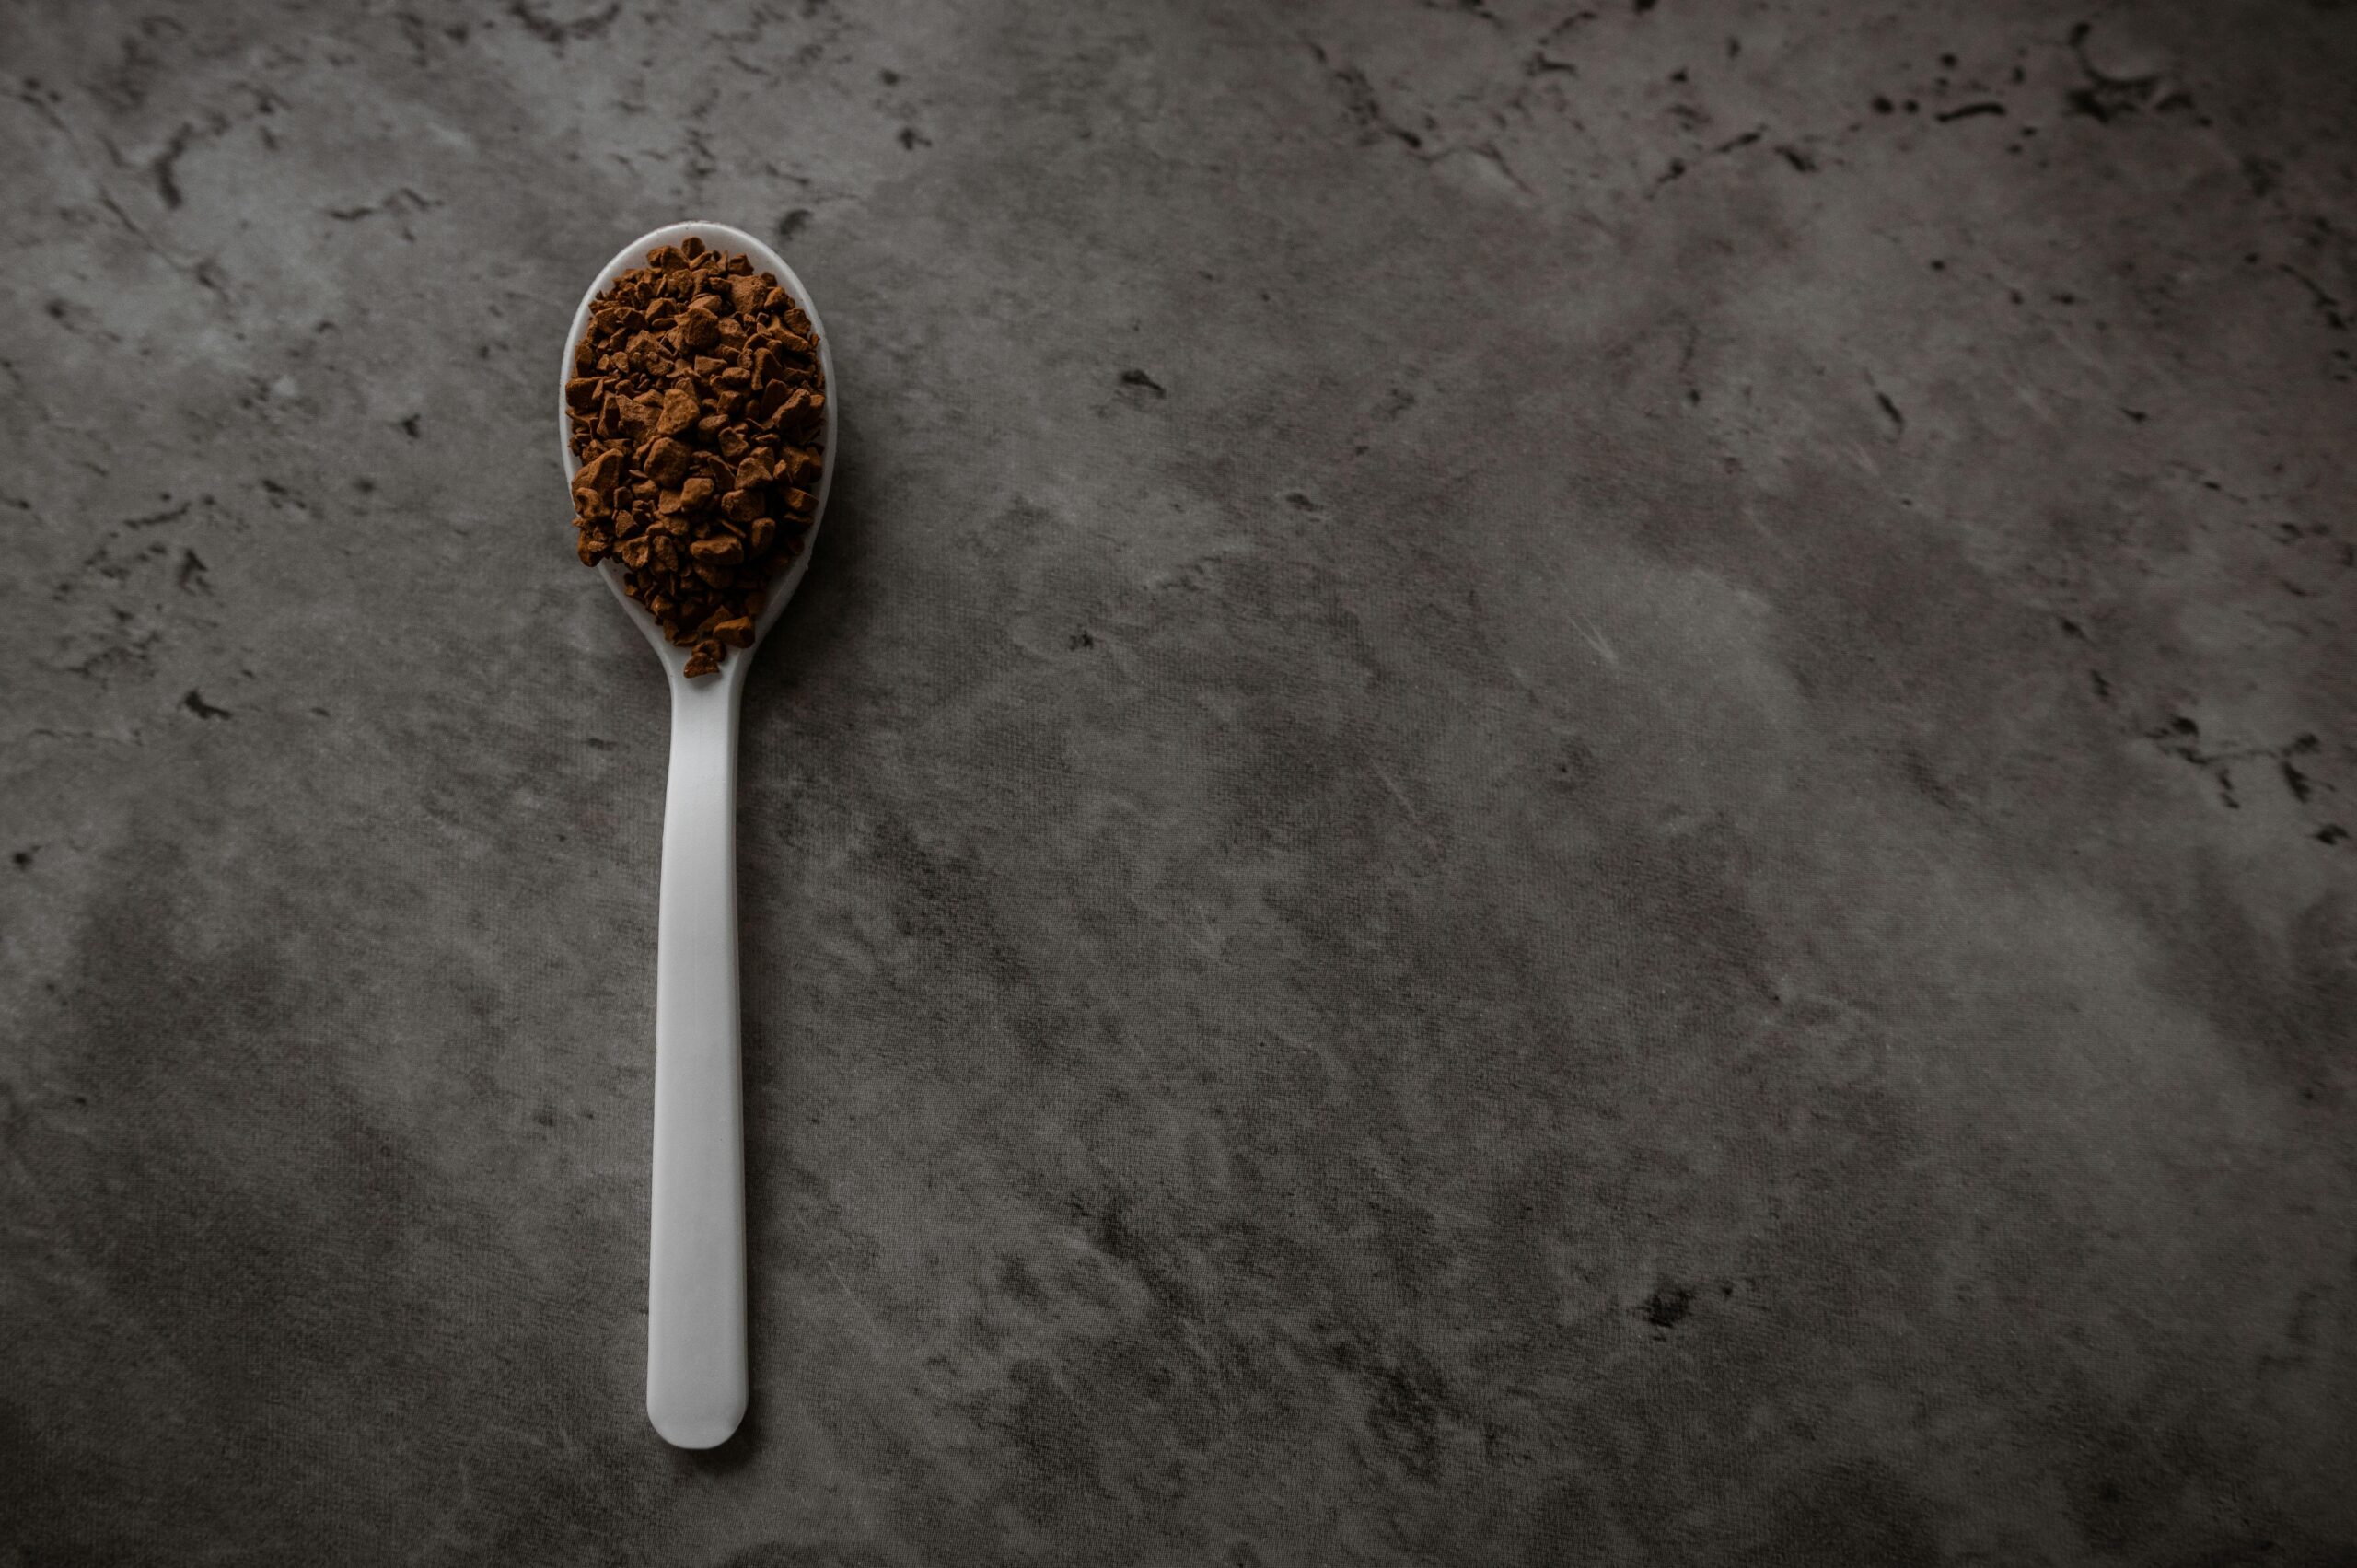 Metal spoon with ground coffee on a concrete background.